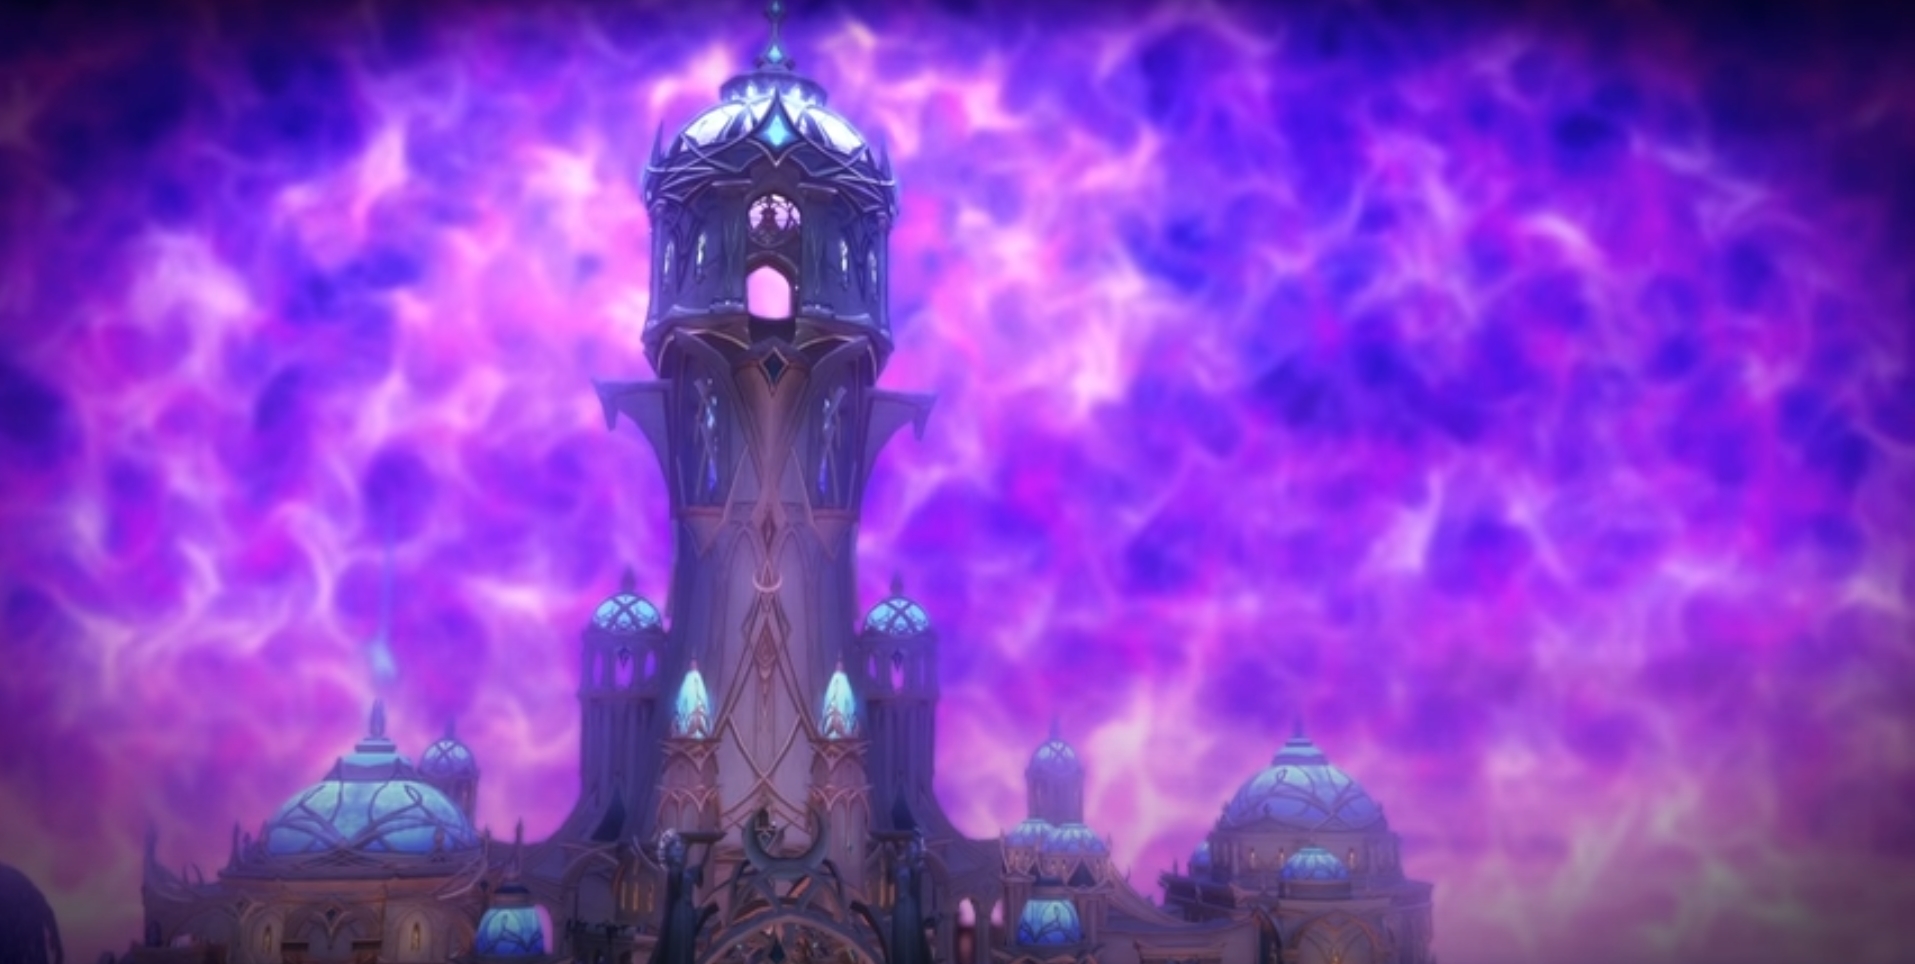 Blizzard Releases New Lore-Centric Short Story A Moment In Verse, Expanding On The Relationship Between Lor’themar And Thalyssra